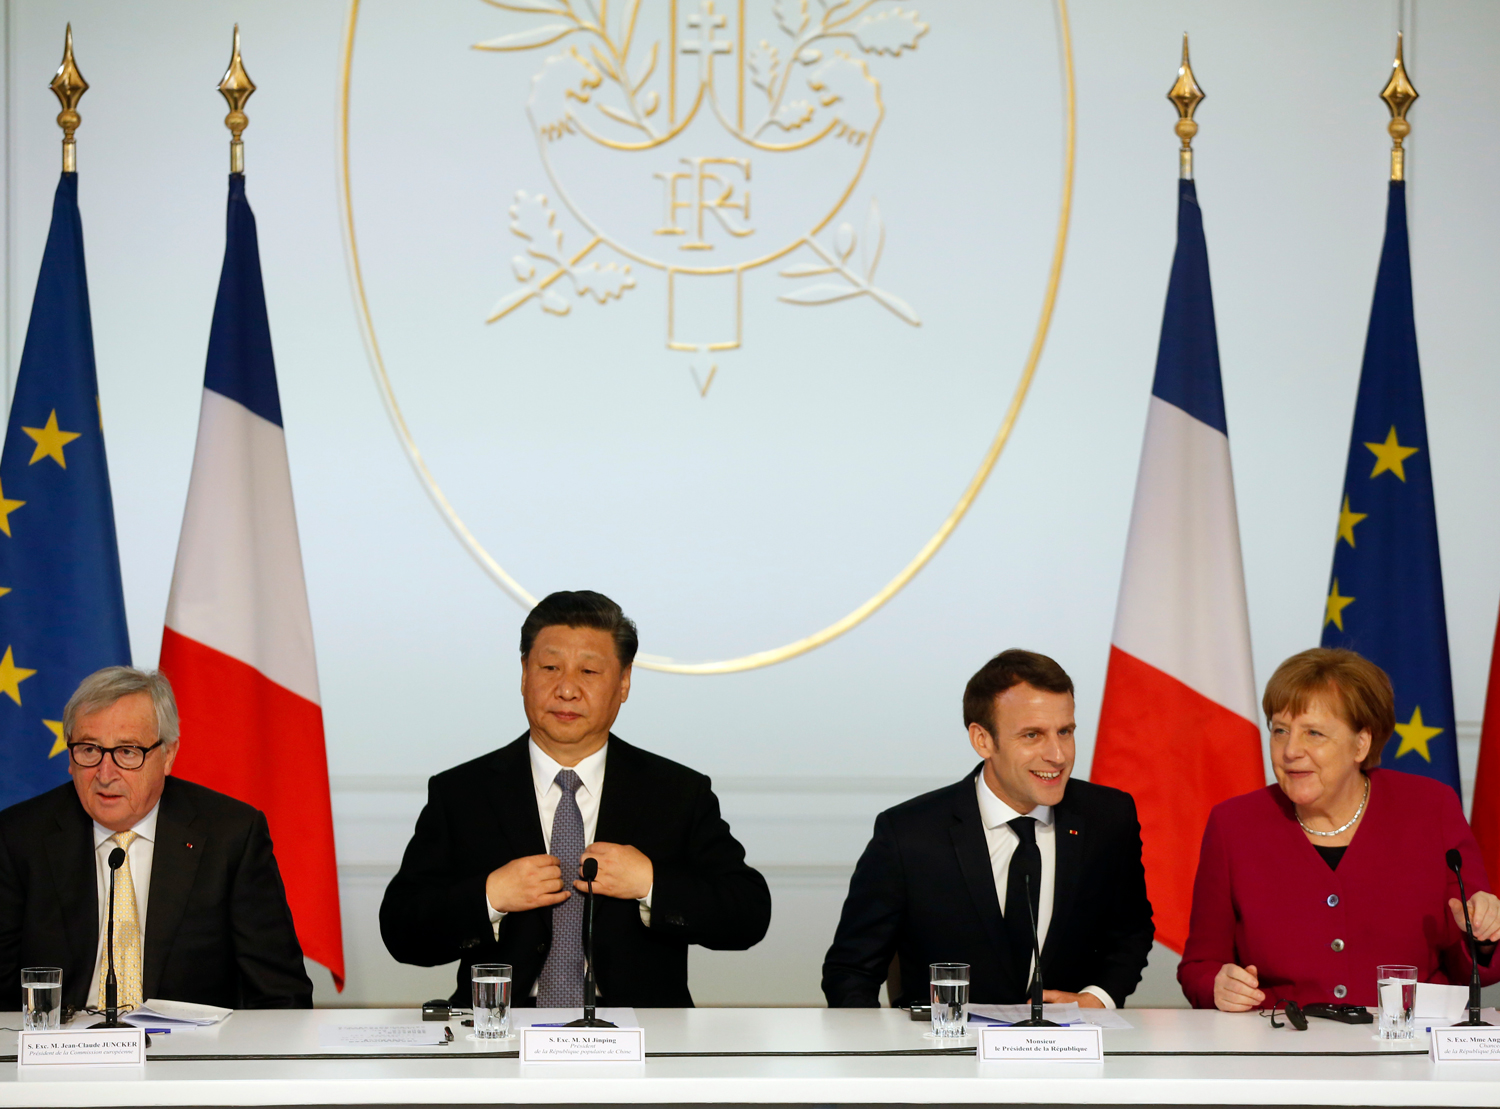 How Should Europe Handle Relations with China?